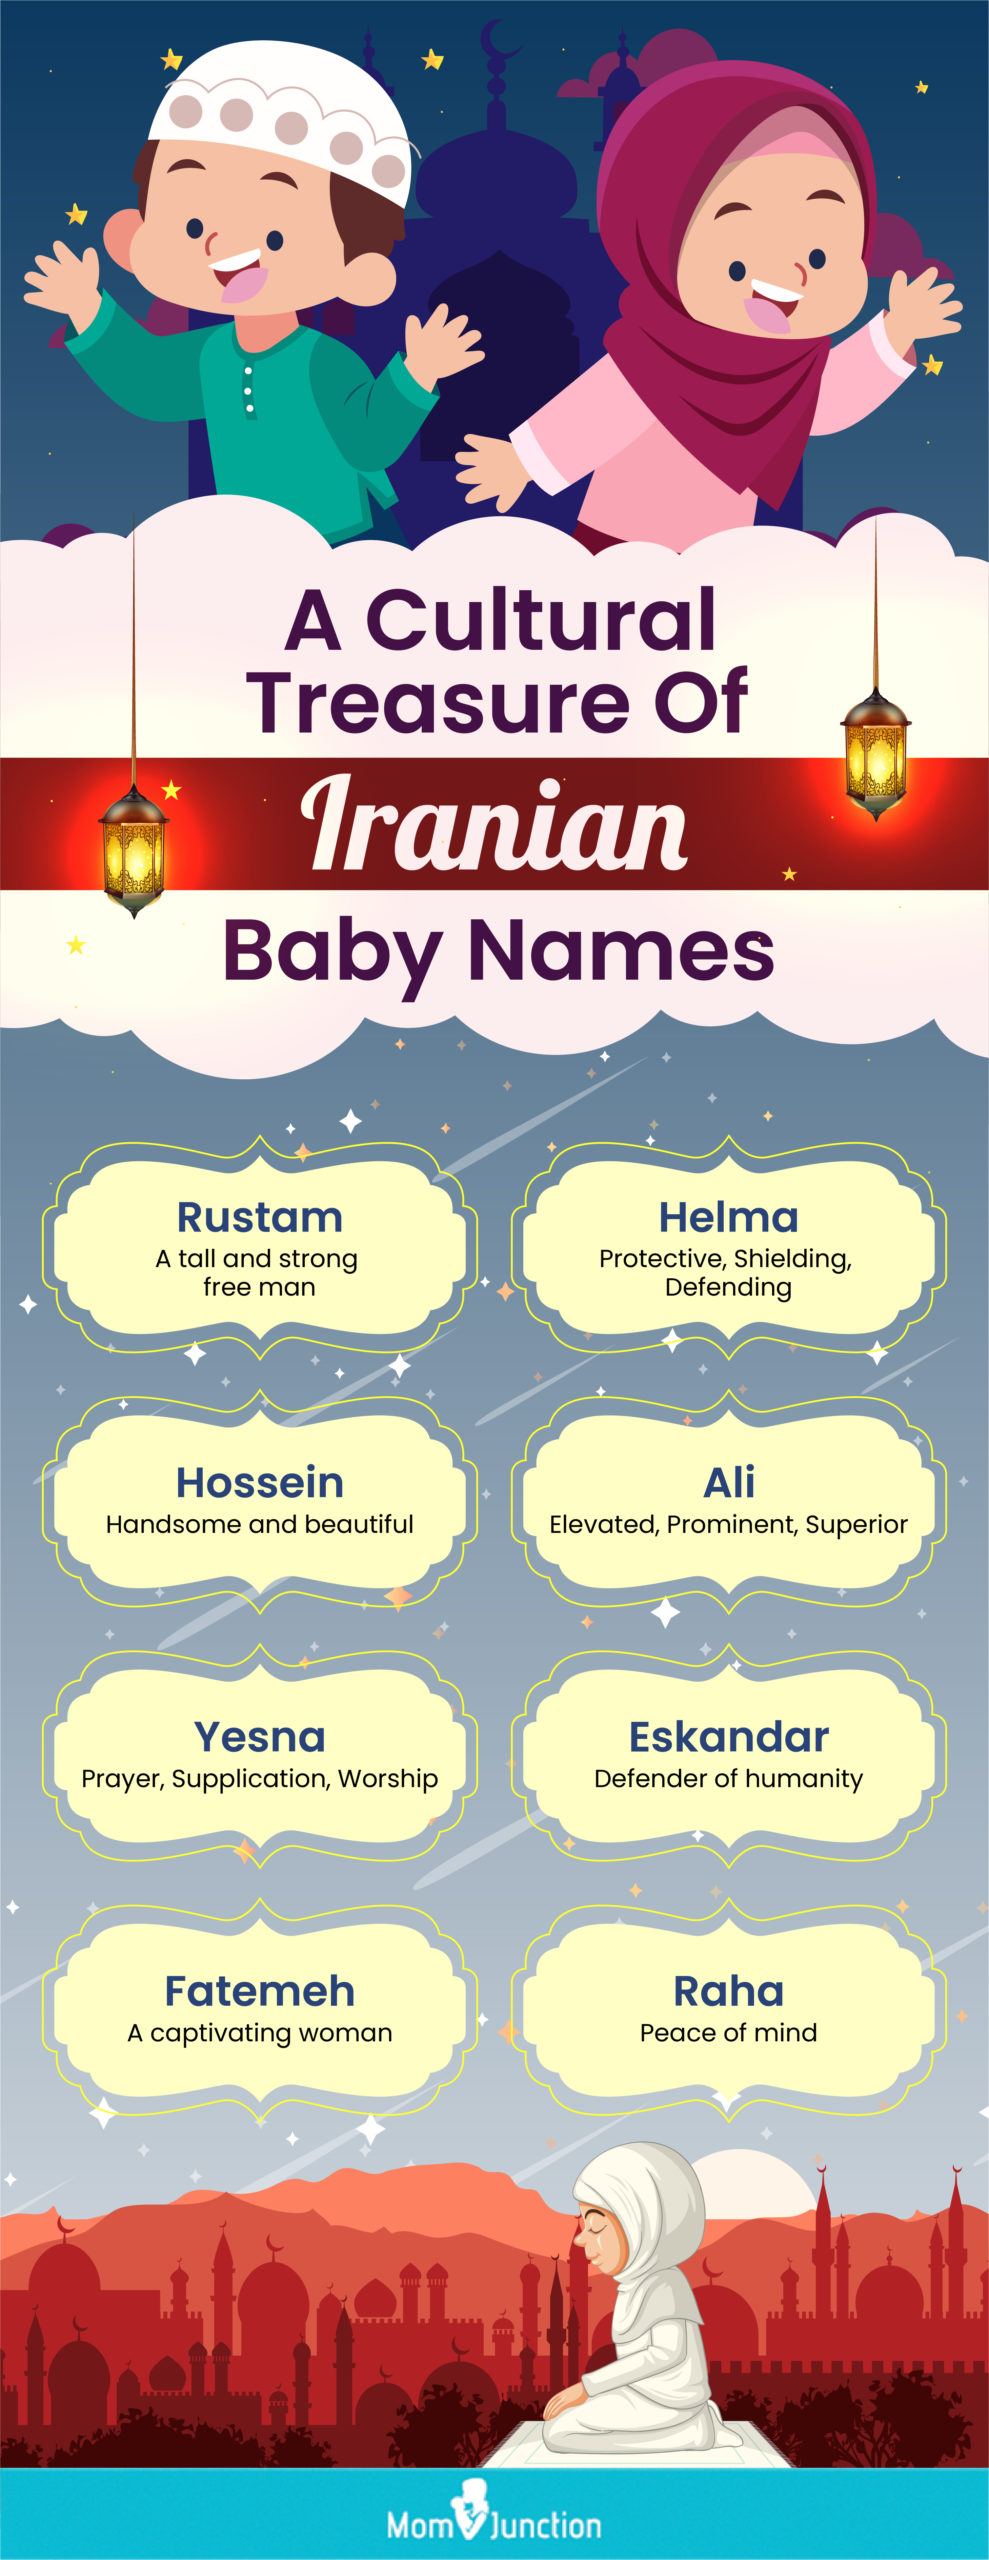 a cultural treasure of iranian baby names (infographic)